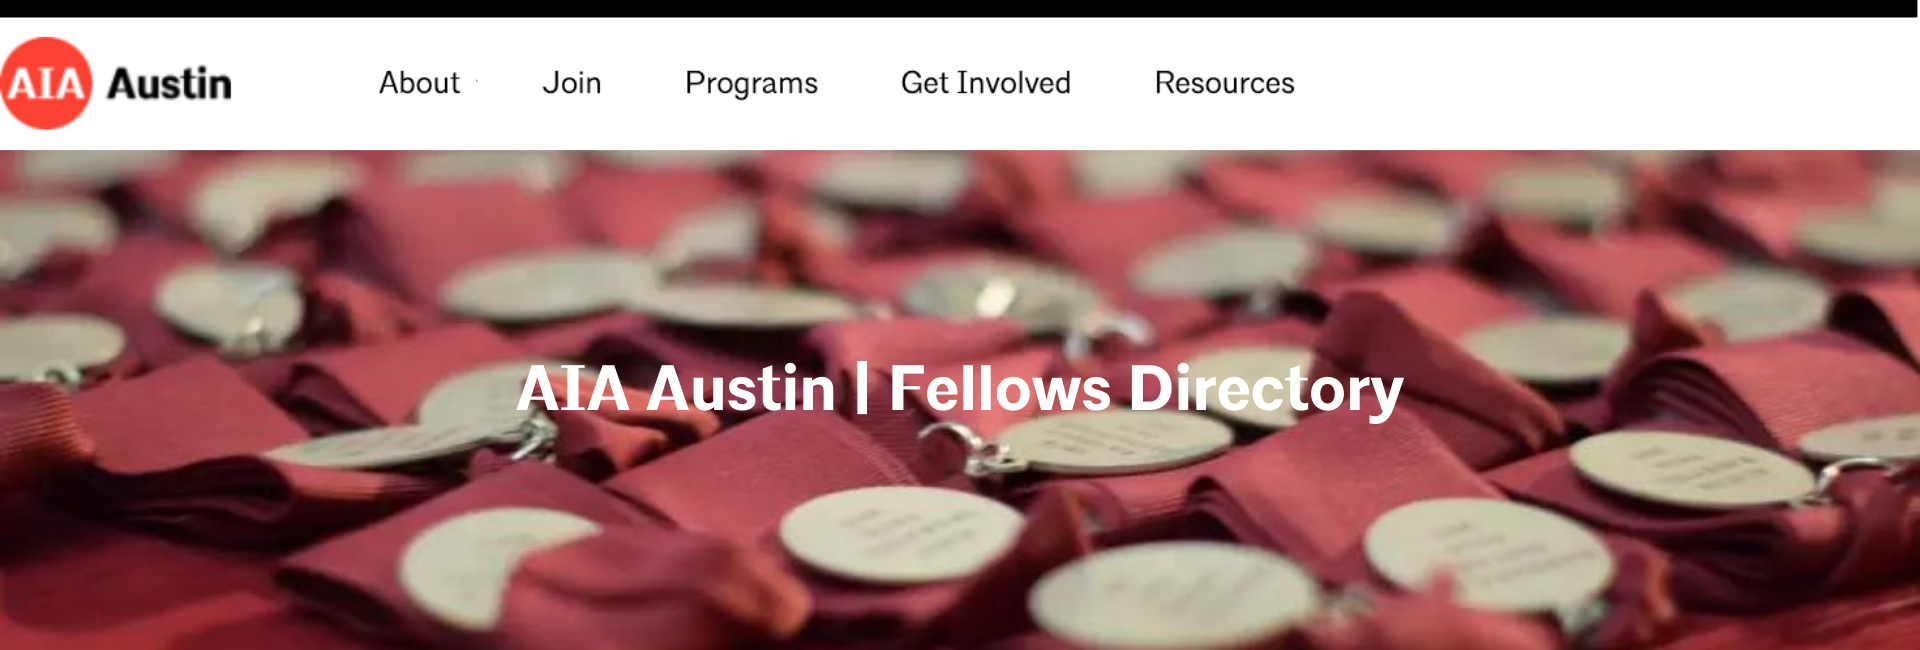 Center for Design ATX • Austin Foundation for Architecture - AIA Austin | Fellows Directory